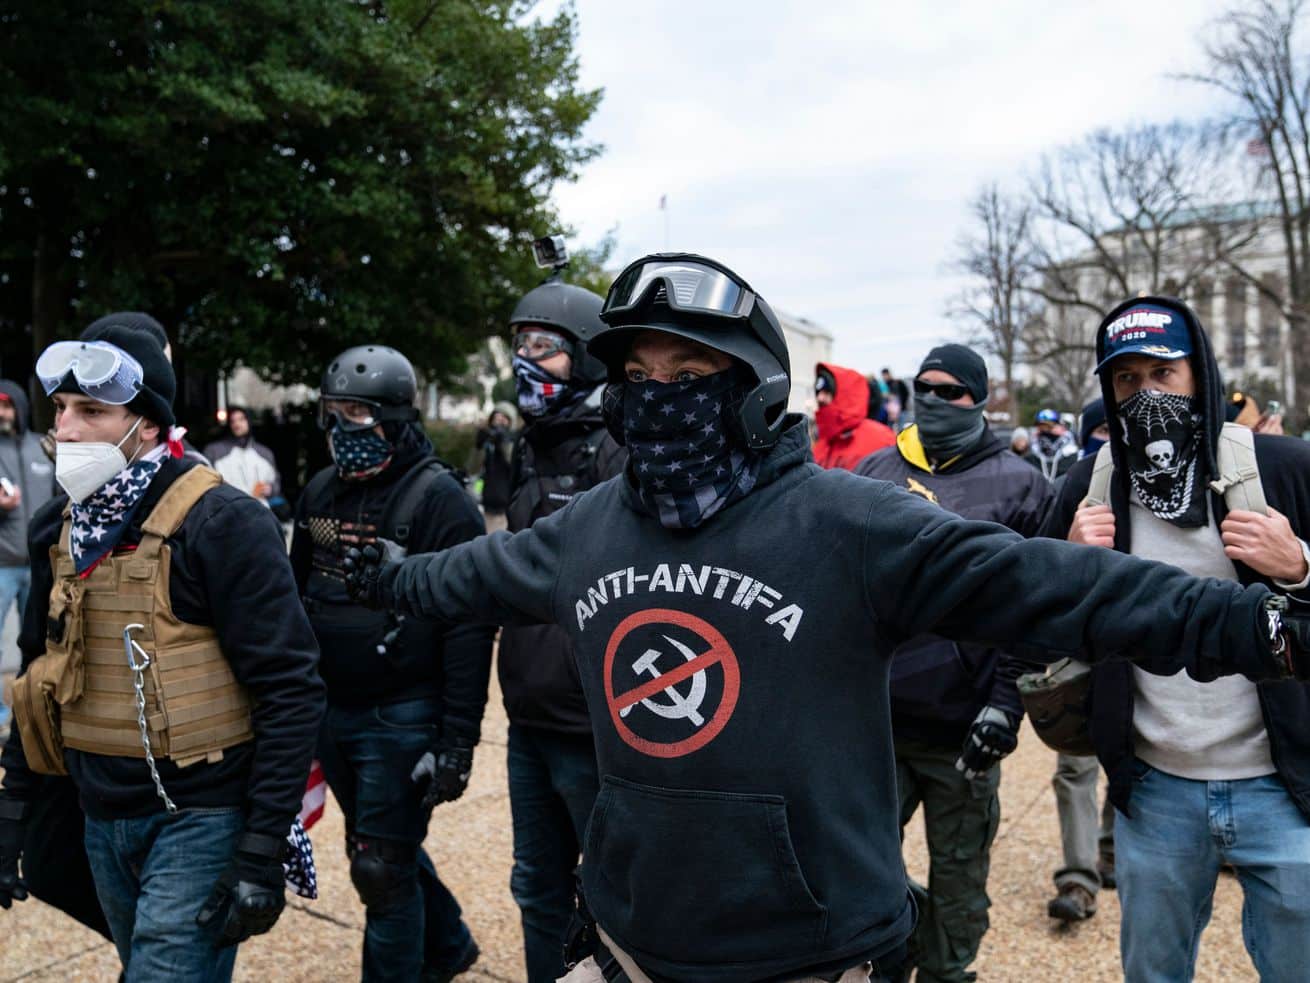 A new lawsuit targets Trump and the Proud Boys under a law enacted to stop the KKK